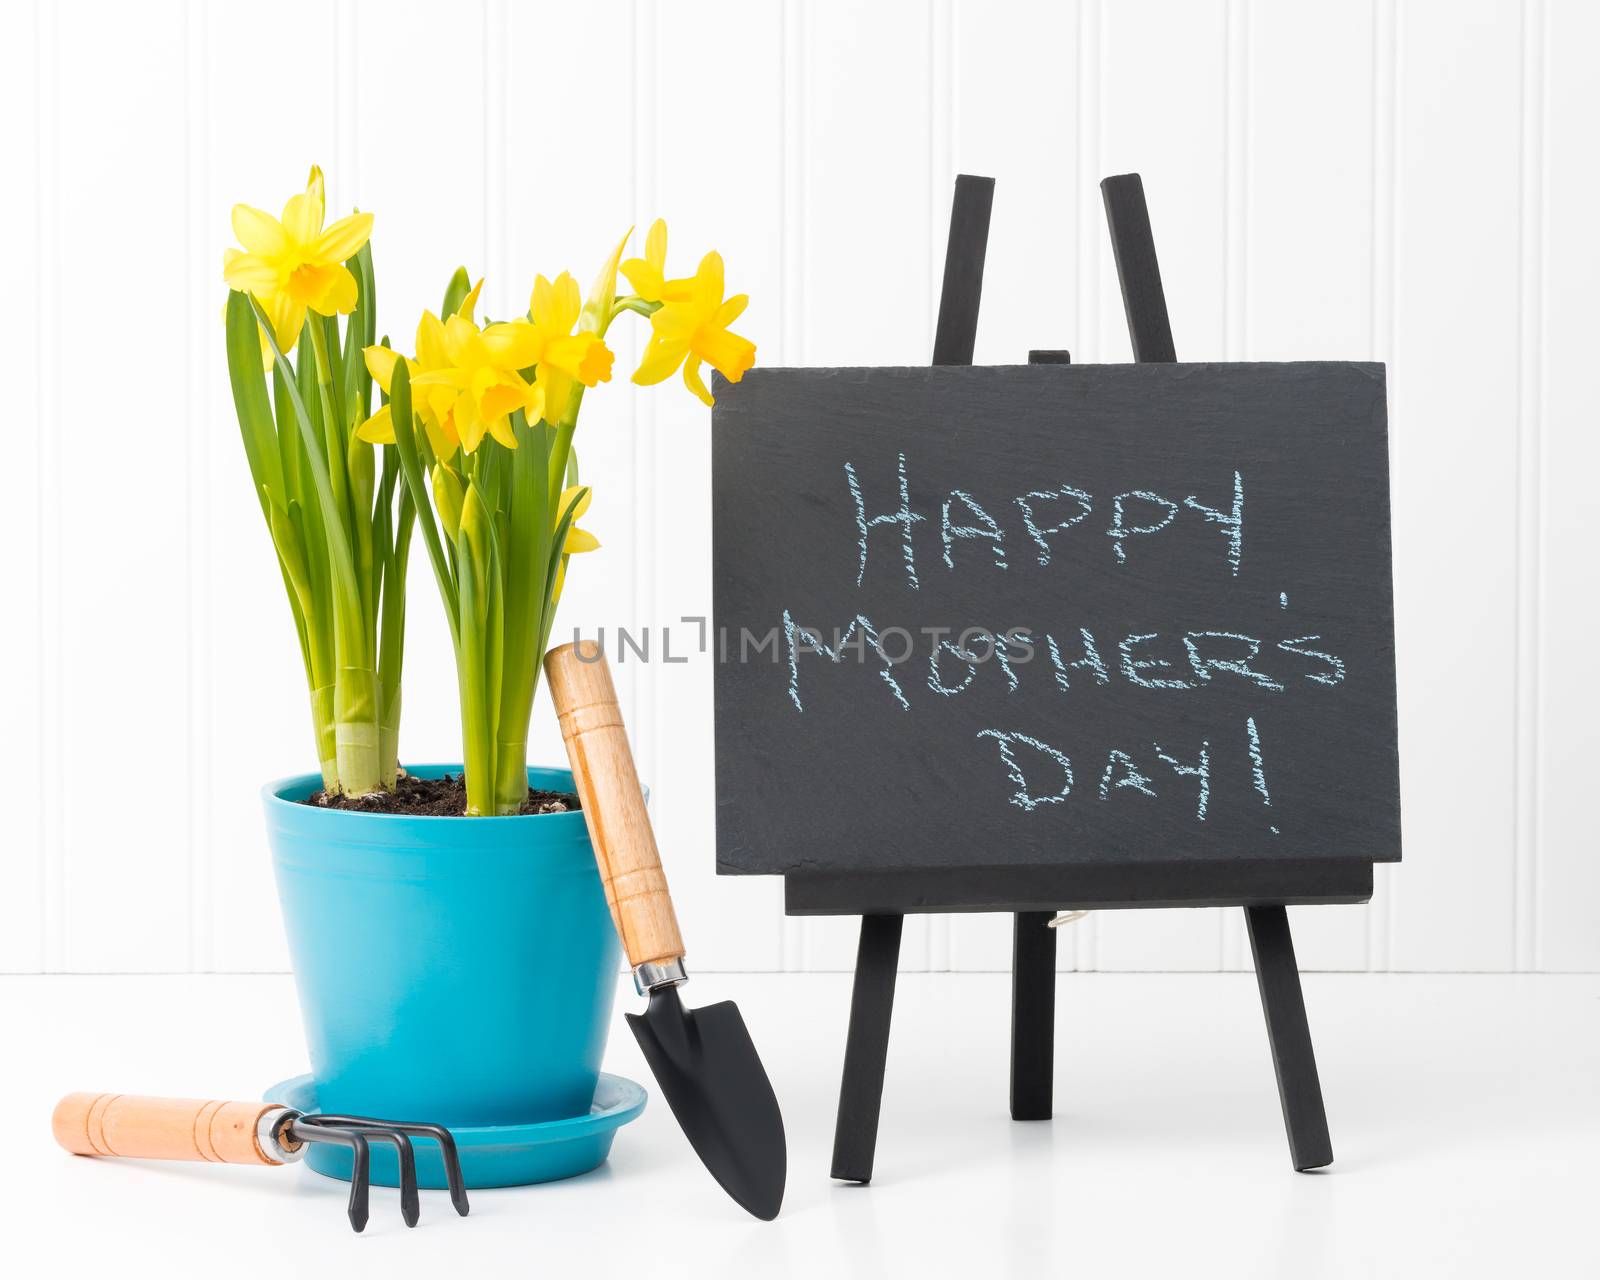 Mothers Day Message by billberryphotography